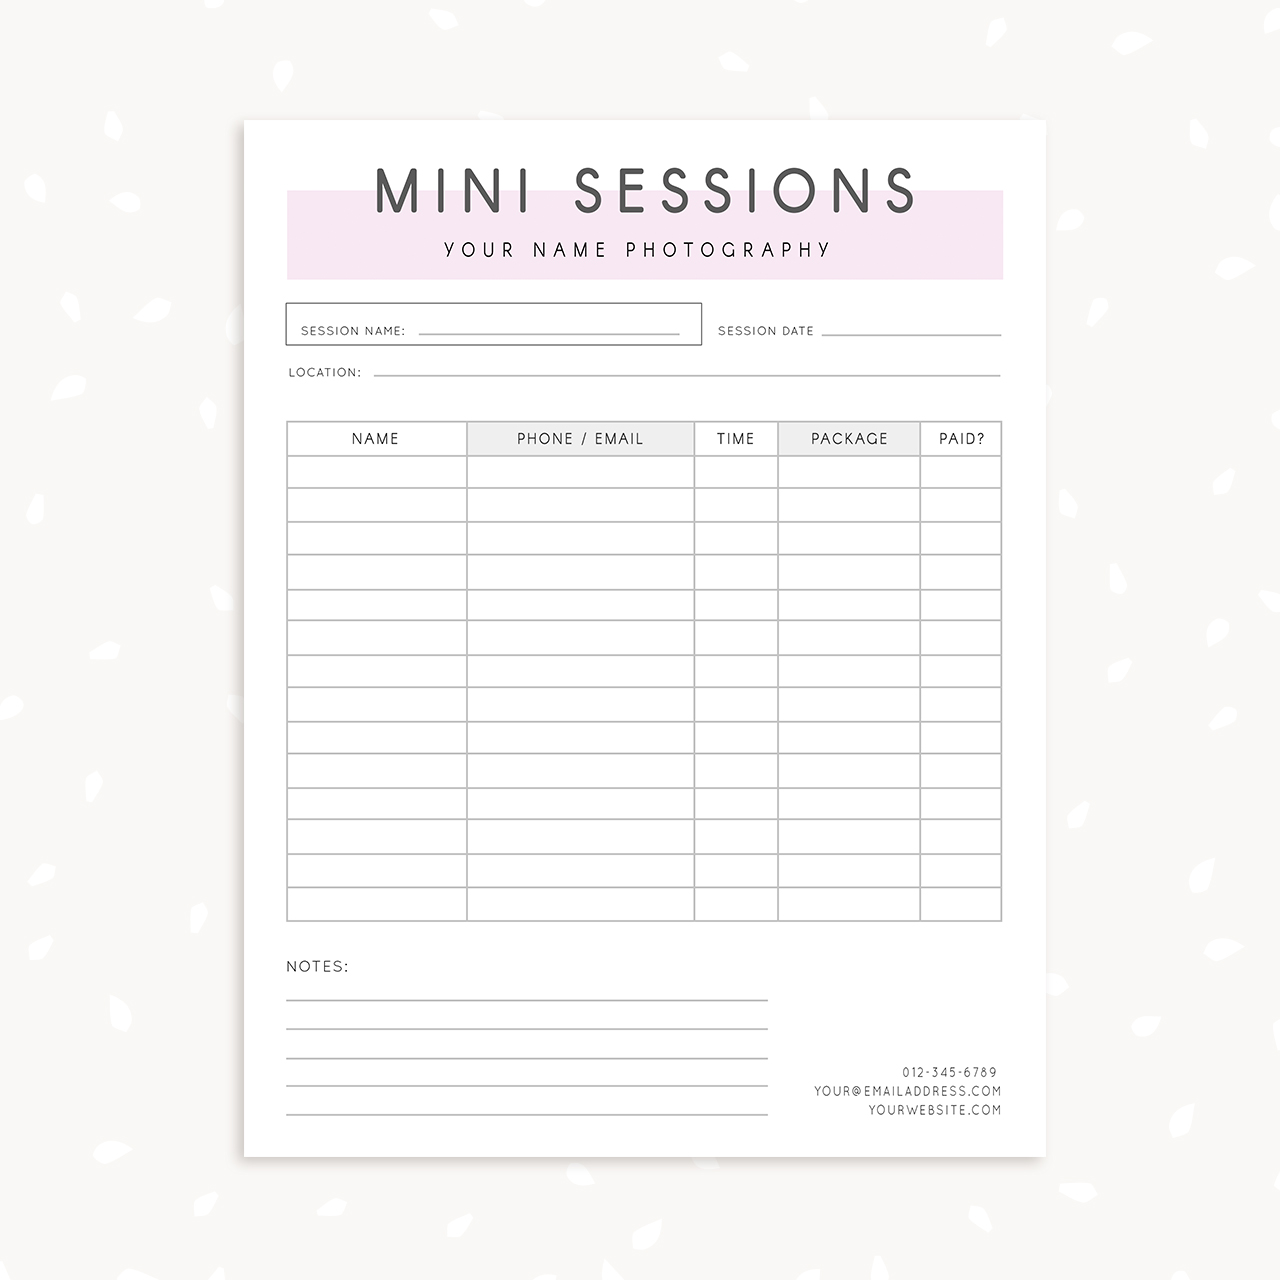 Mini sessions sign up form template